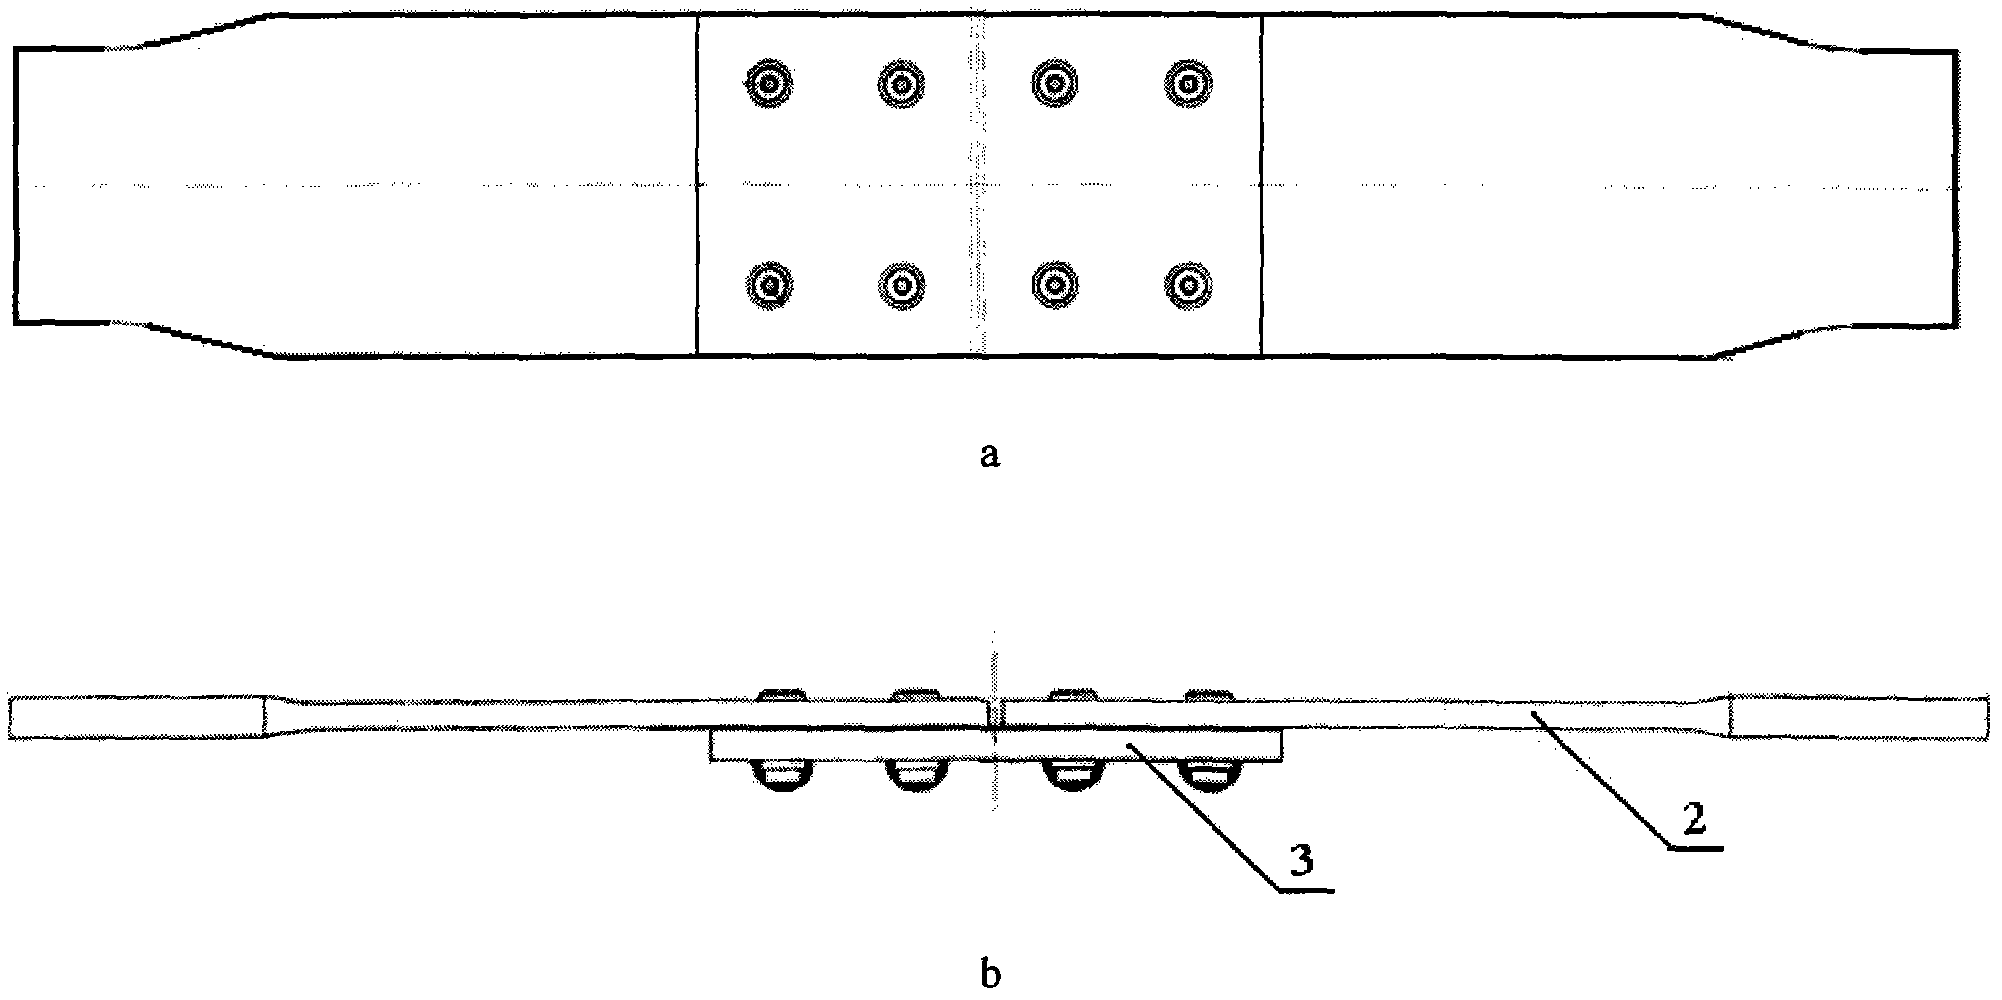 Fatigue property test method for wallboard lap joint structure